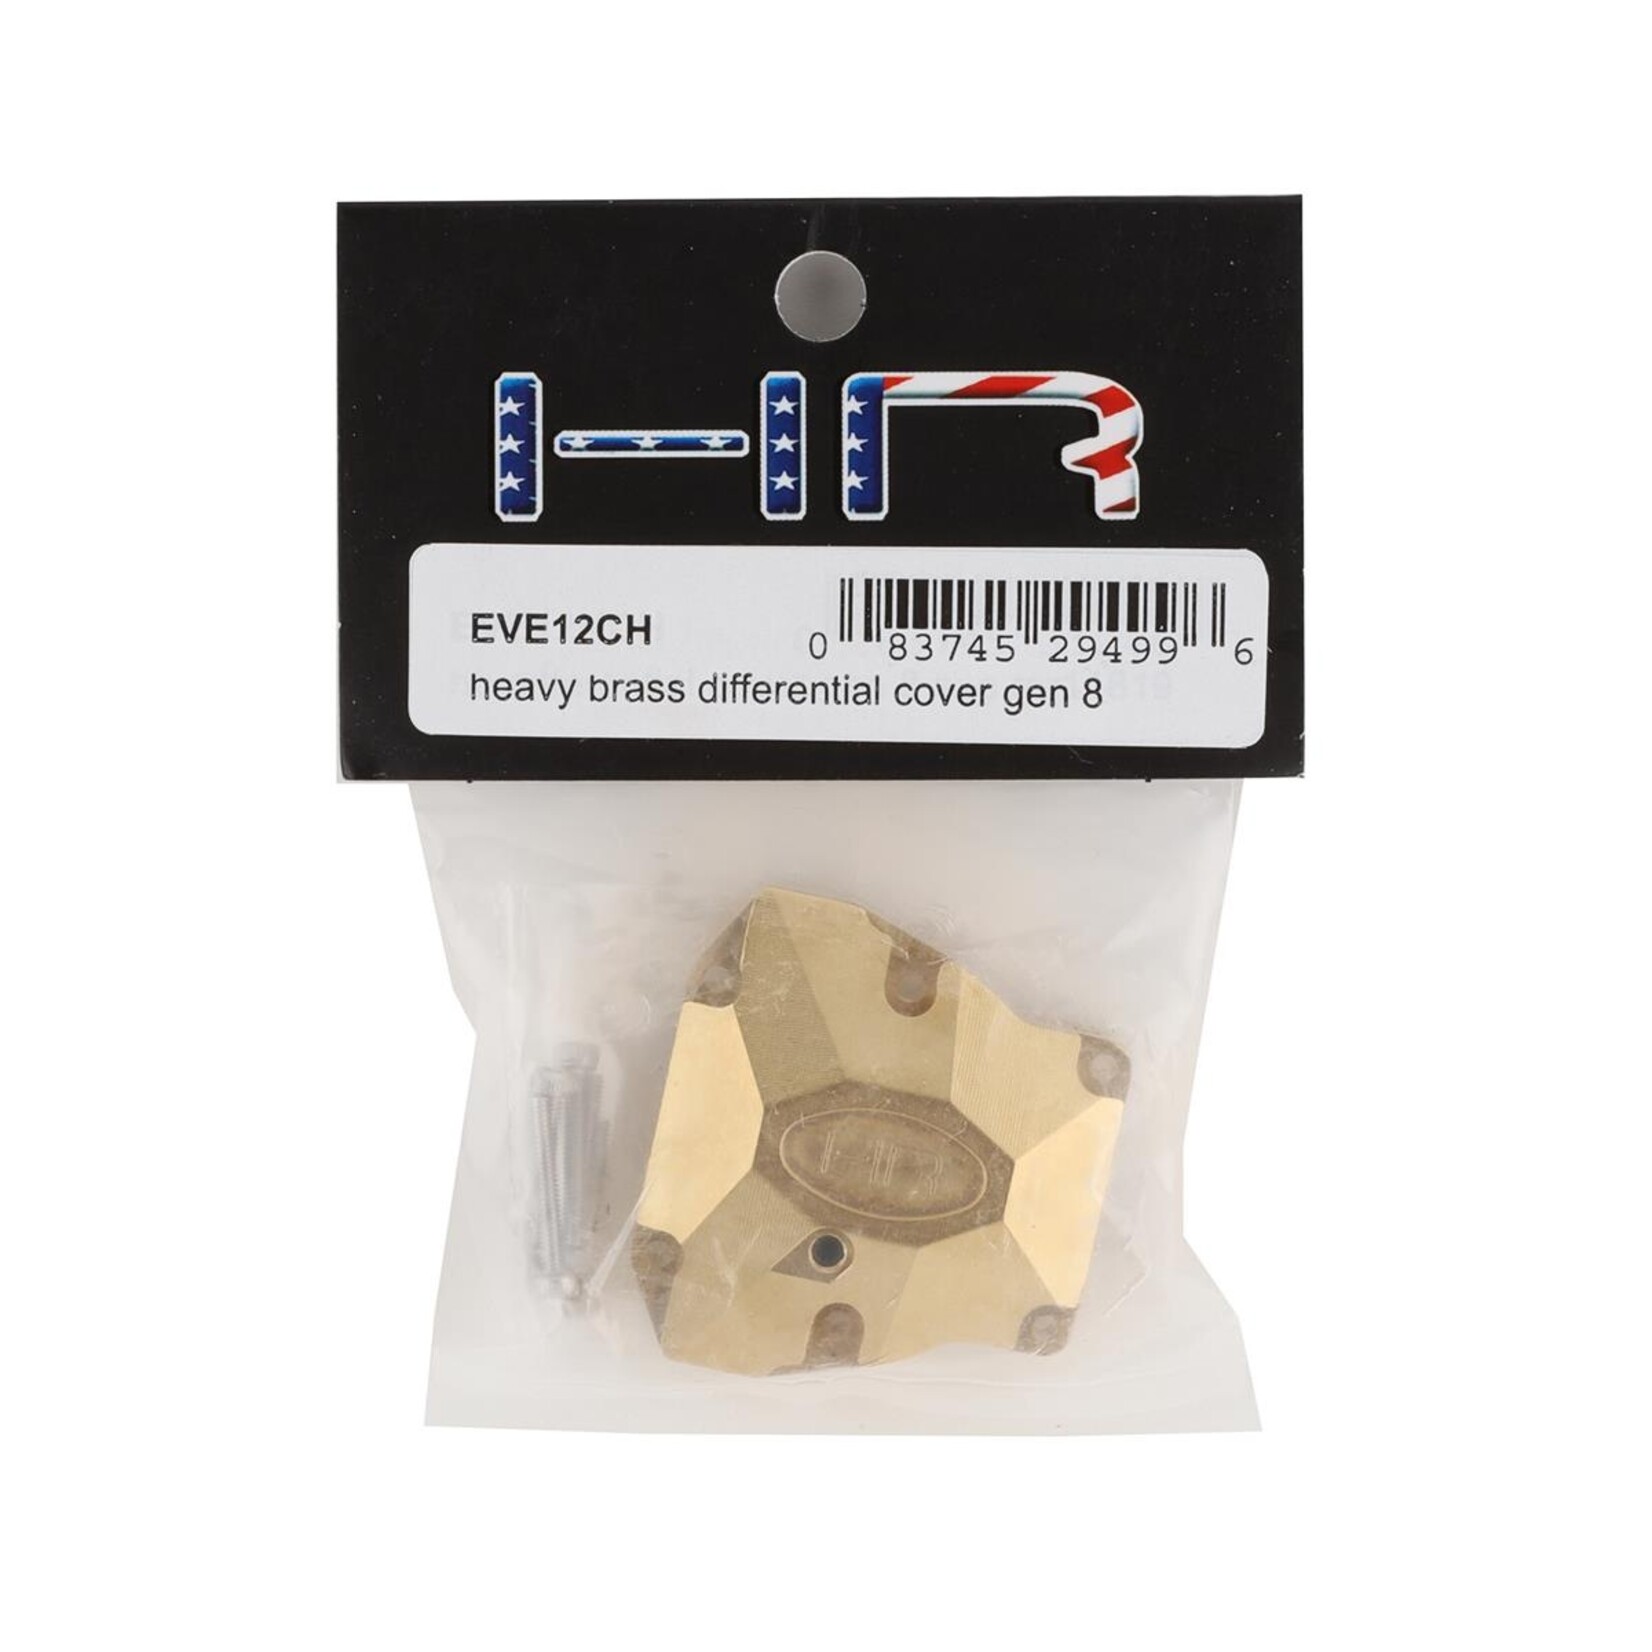 Hot Racing Hot Racing Redcat Gen8 Brass Differential Cover #EVE12CH